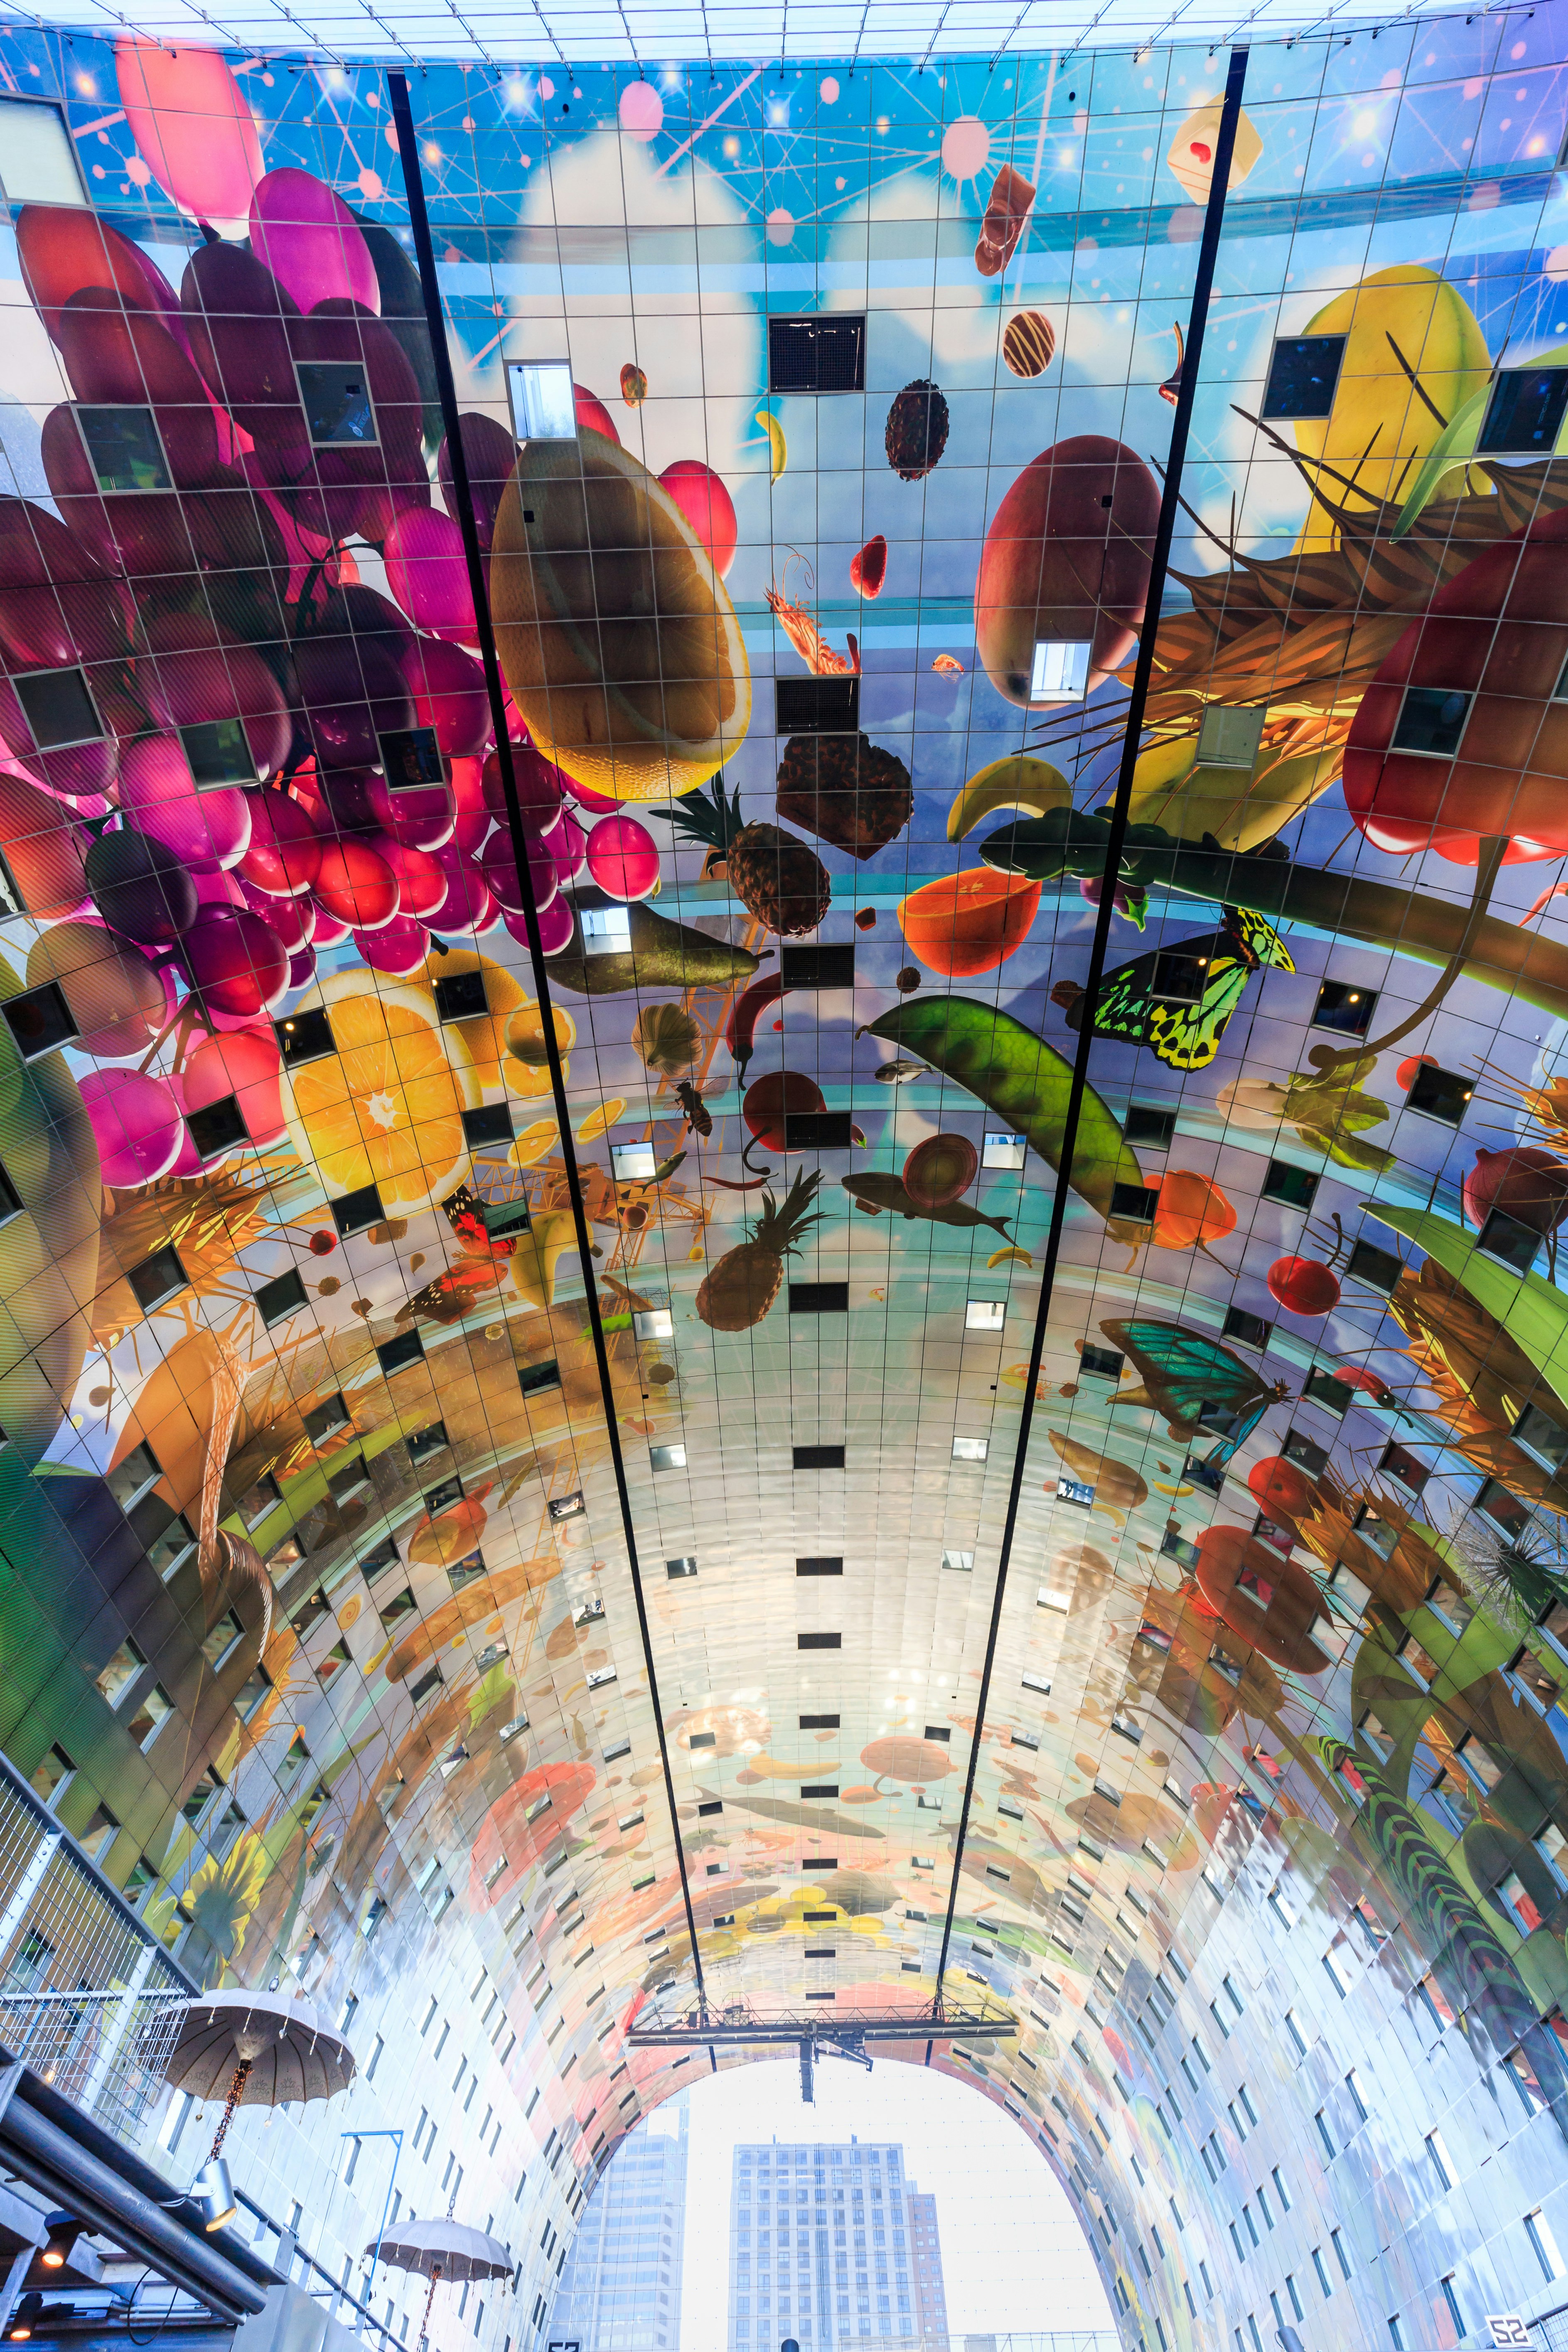 The huge arched ceiling of the Rotterdam Markthal; it's entirely covered with a projection of a colourful artwork.